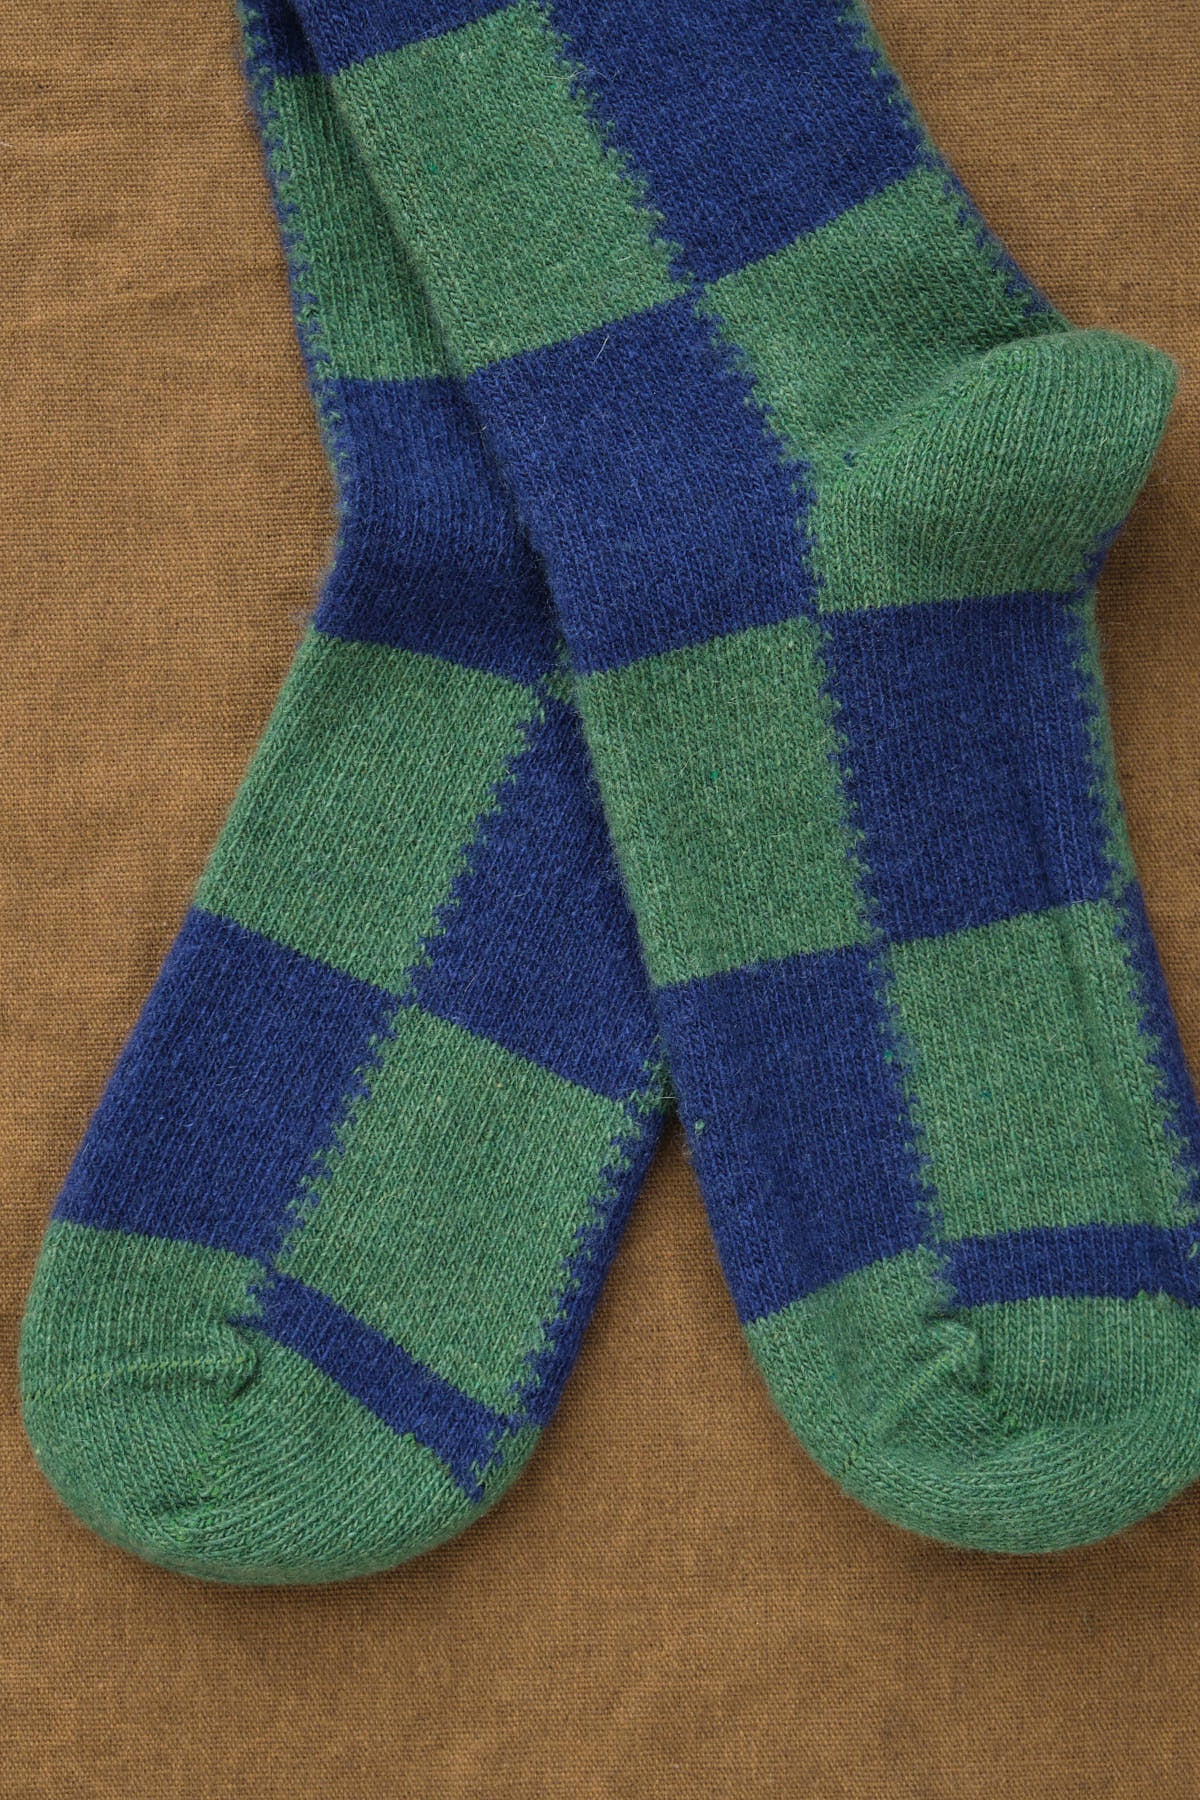 Cashmere-blend blue and green colorblock socks